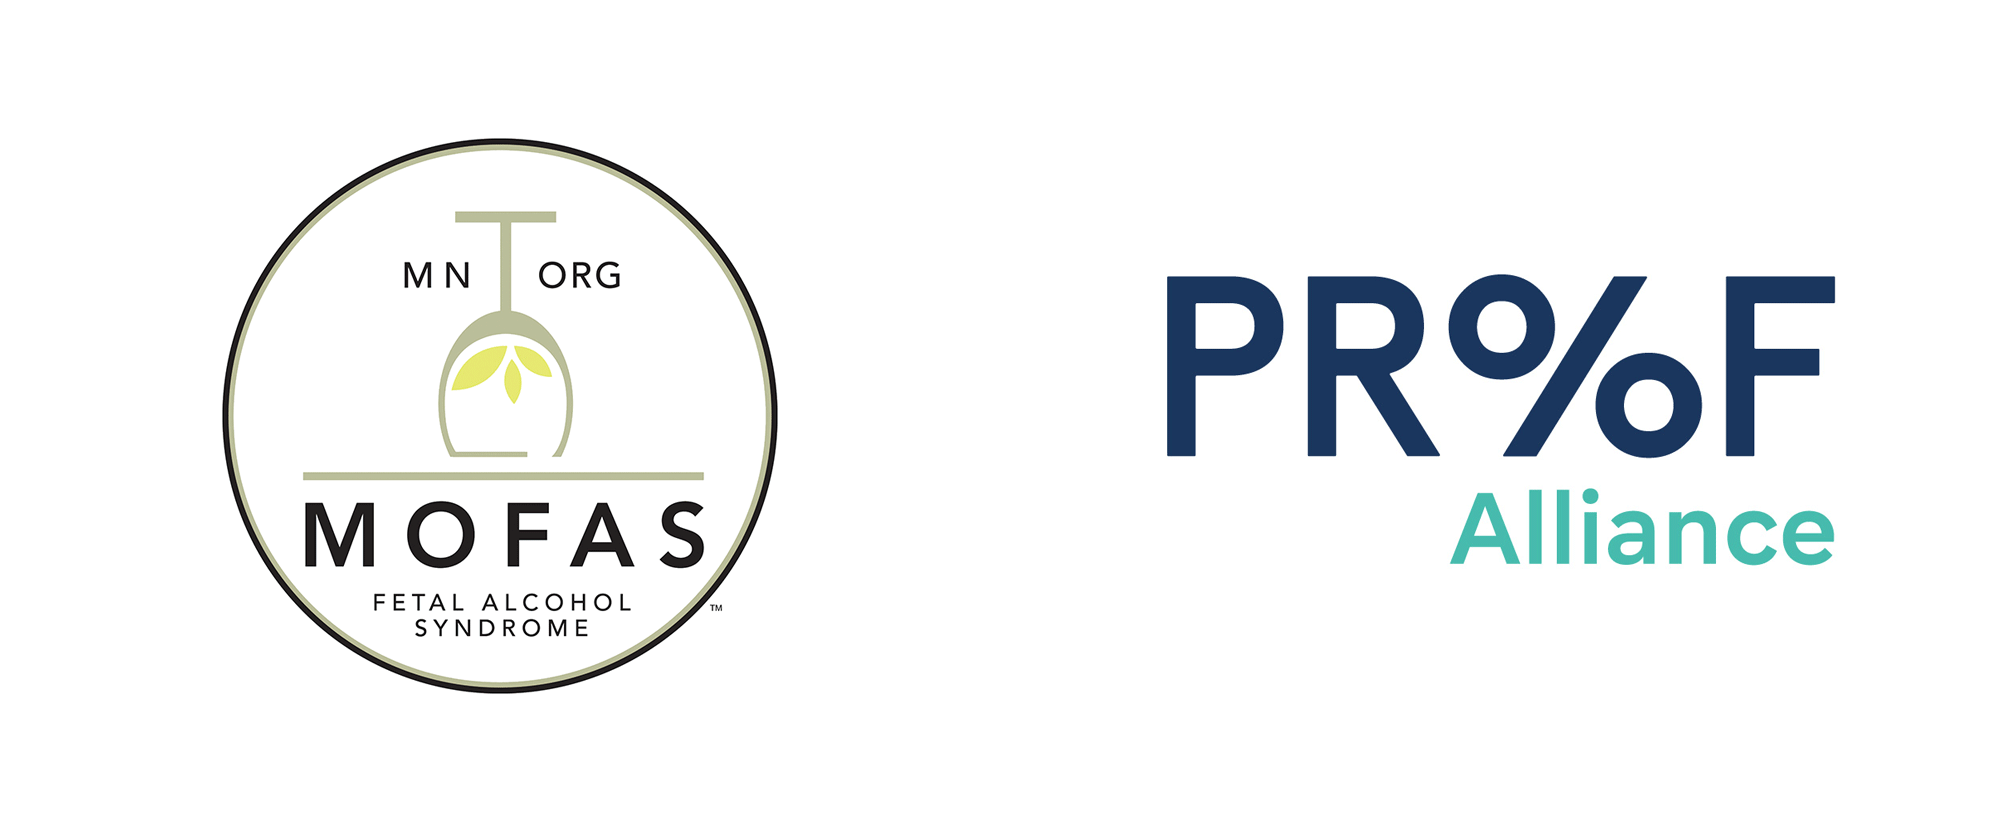 New Logo and Identity for Proof Alliance by 10 Thousand Design